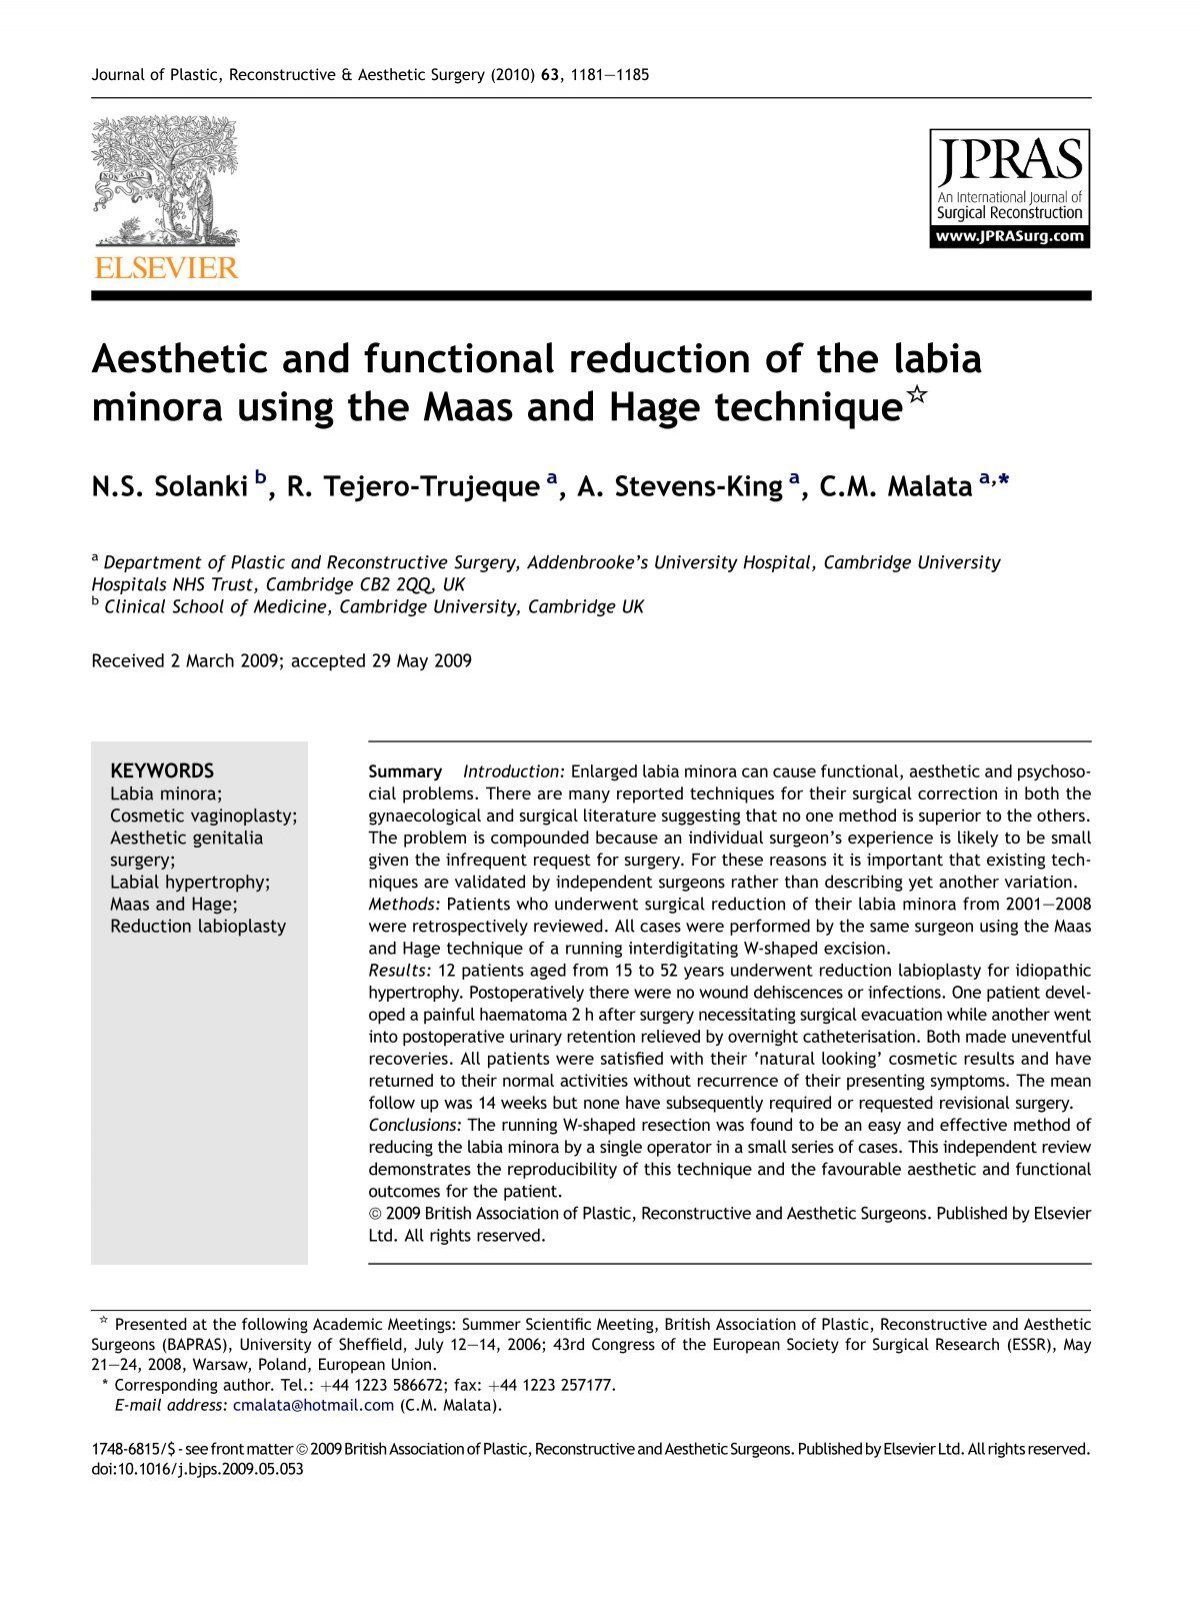 Aesthetic And Functional Reduction Of The Labia Minora Researchgate